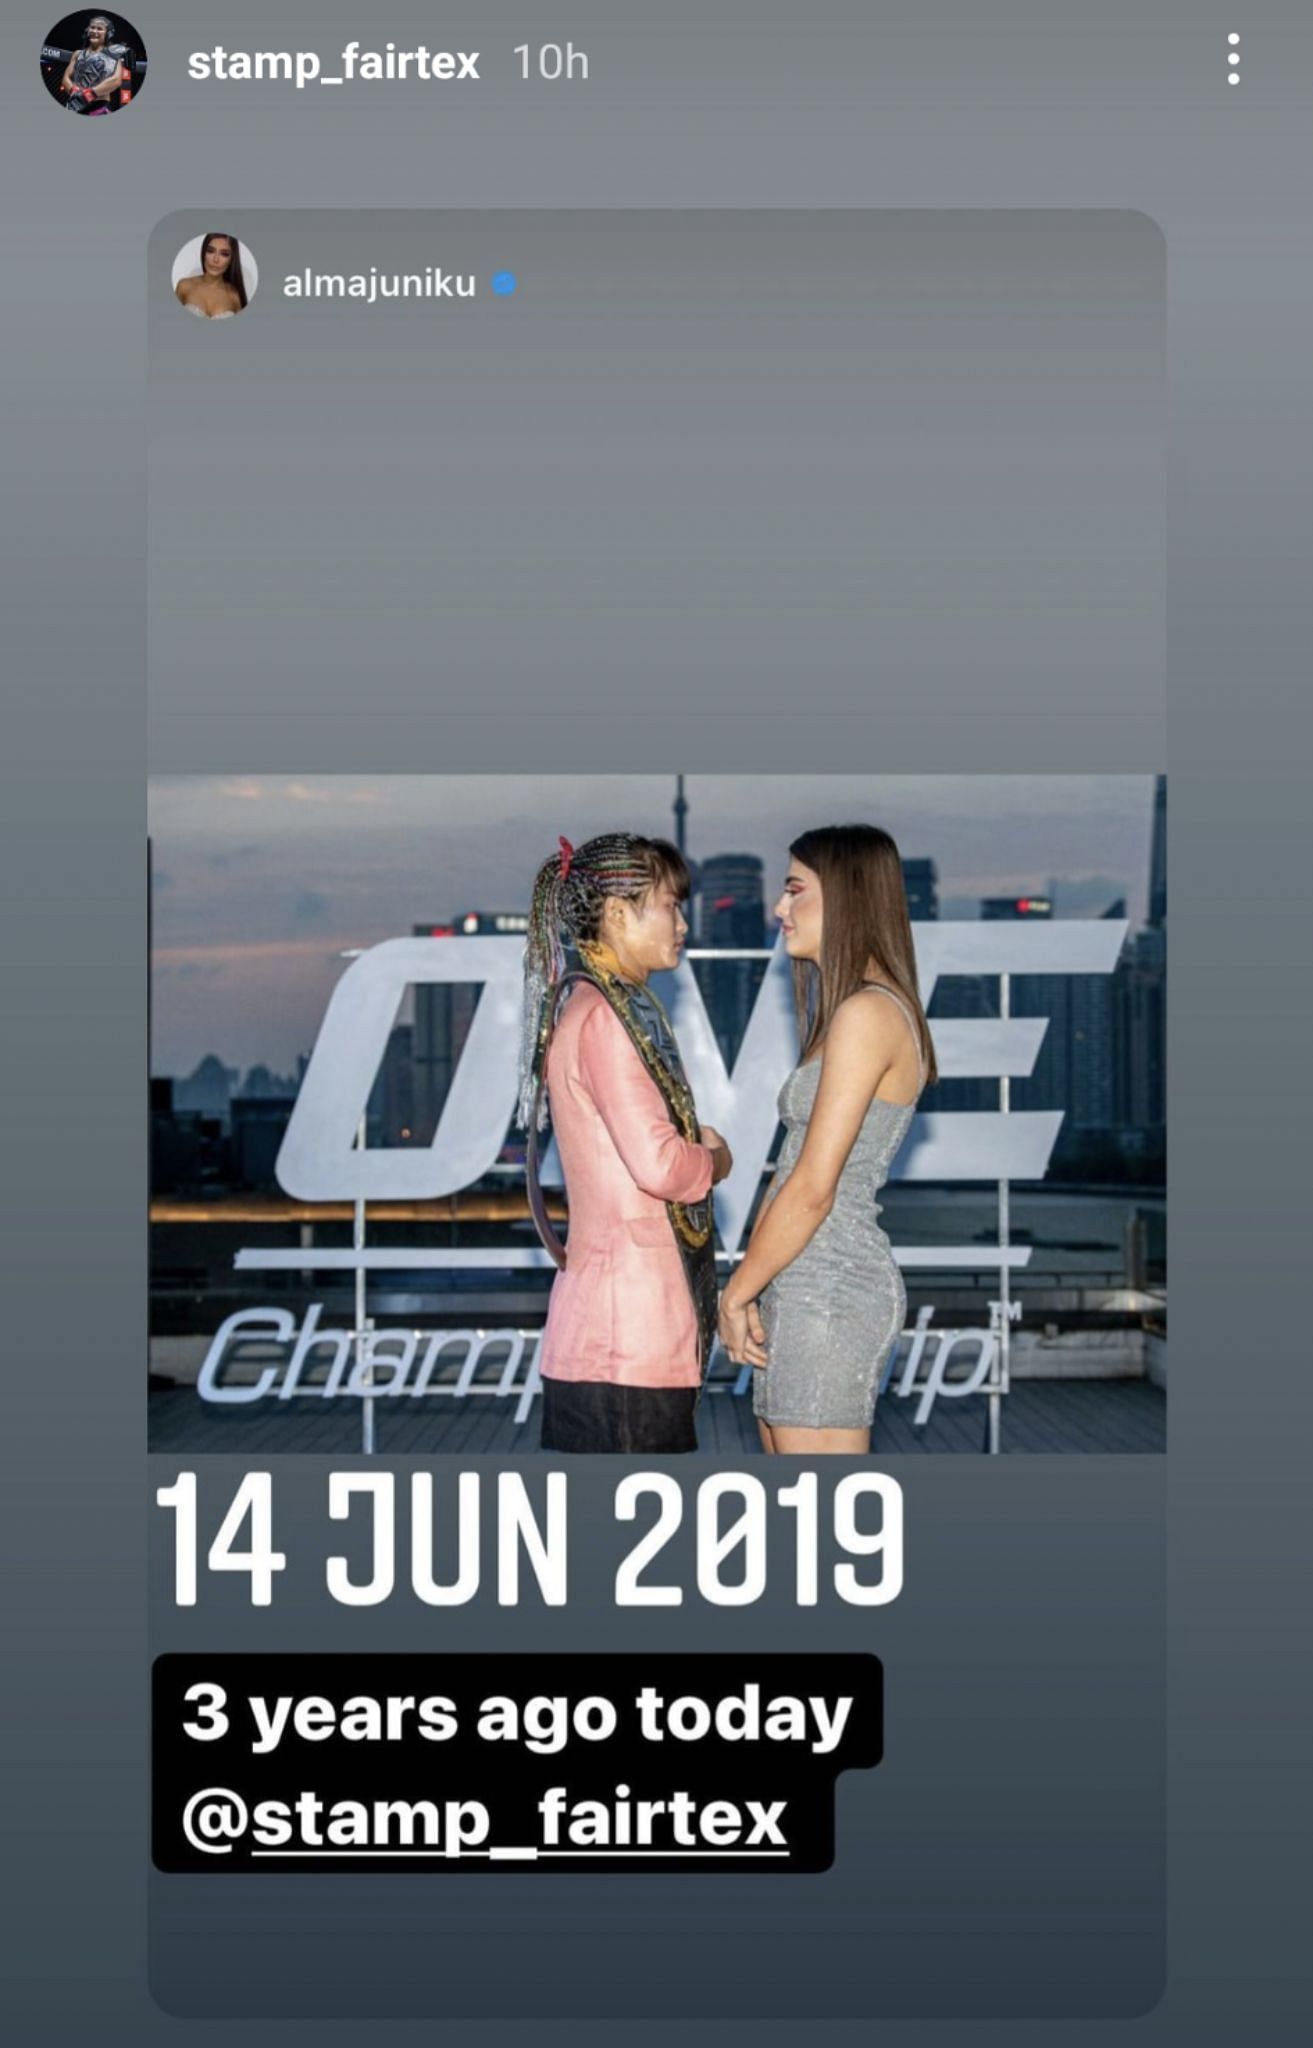 @Stamp_Fairtex shares an image on her Instagram story